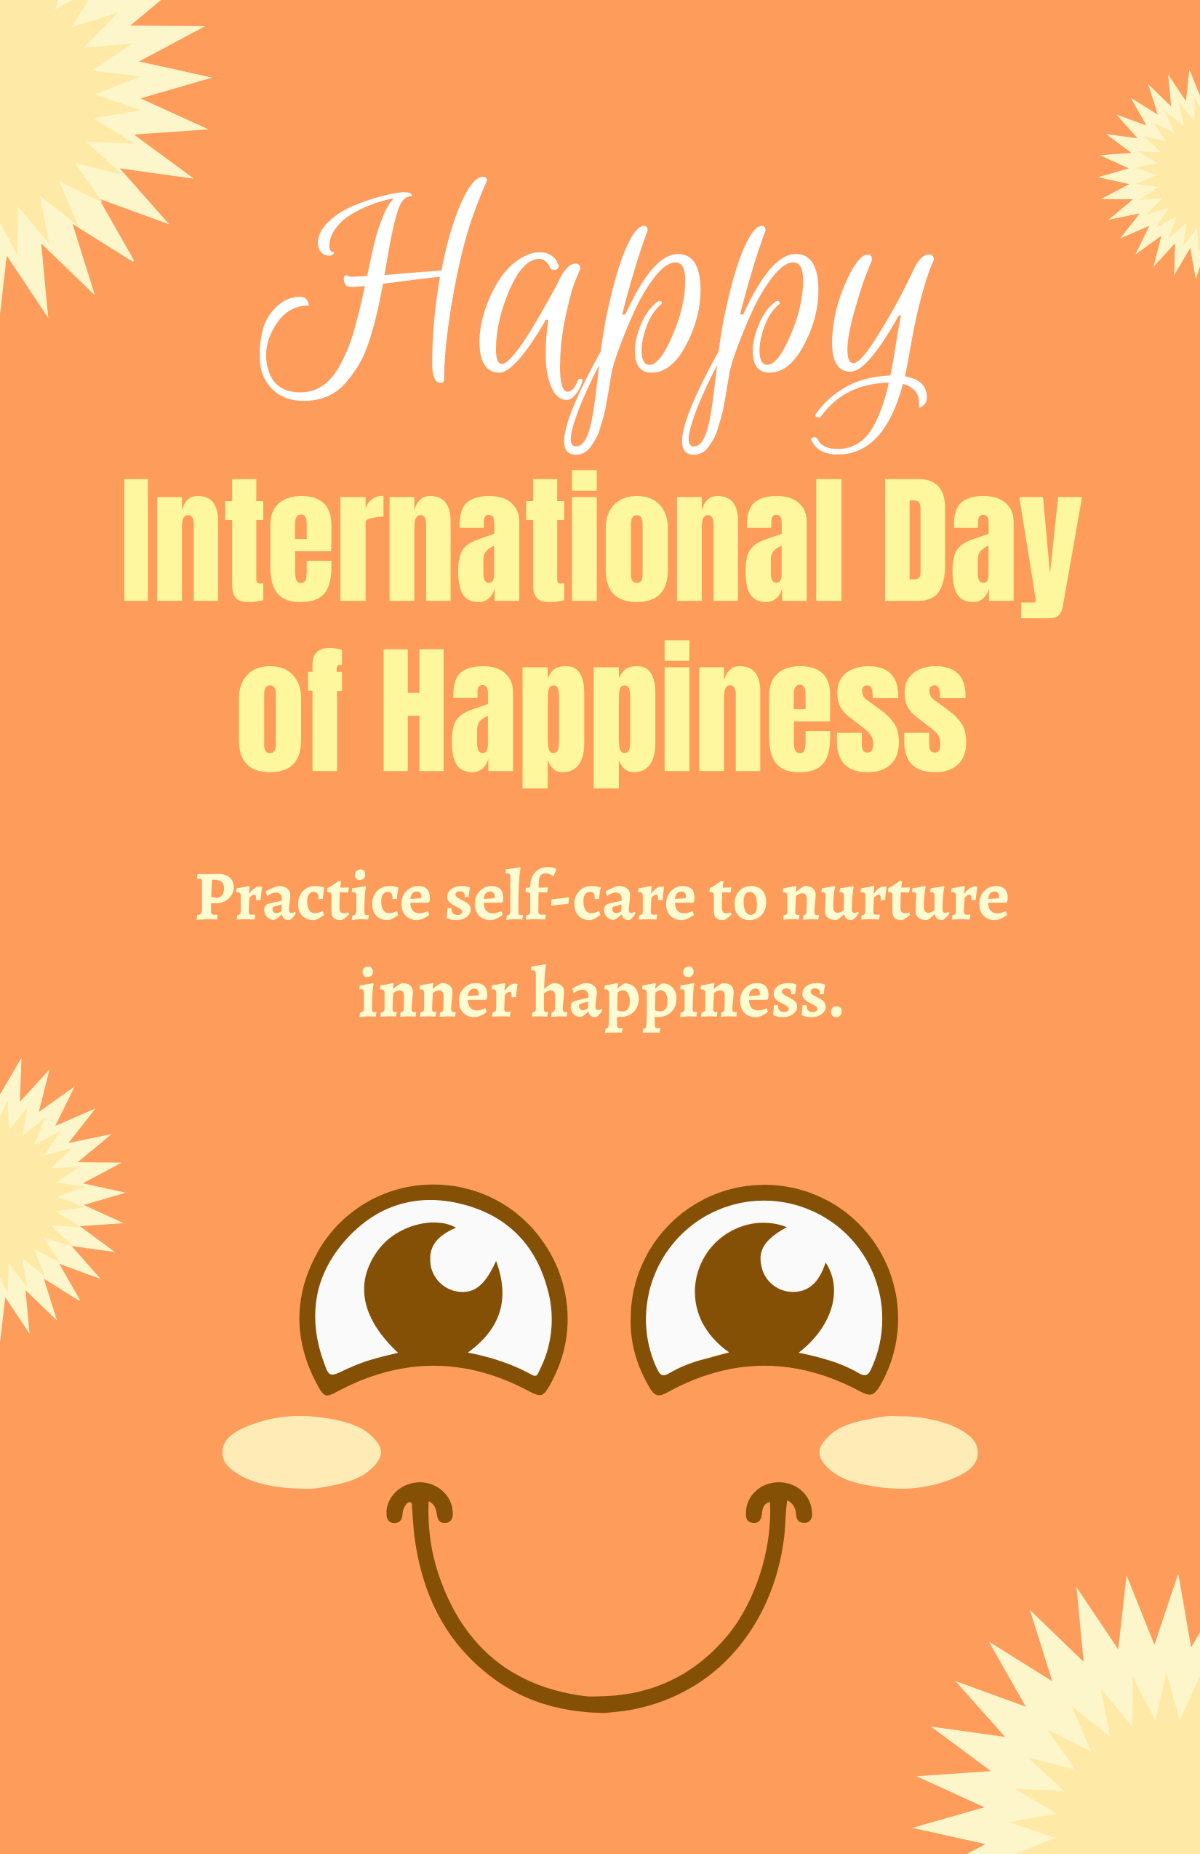 International Day of Happiness Poster Template